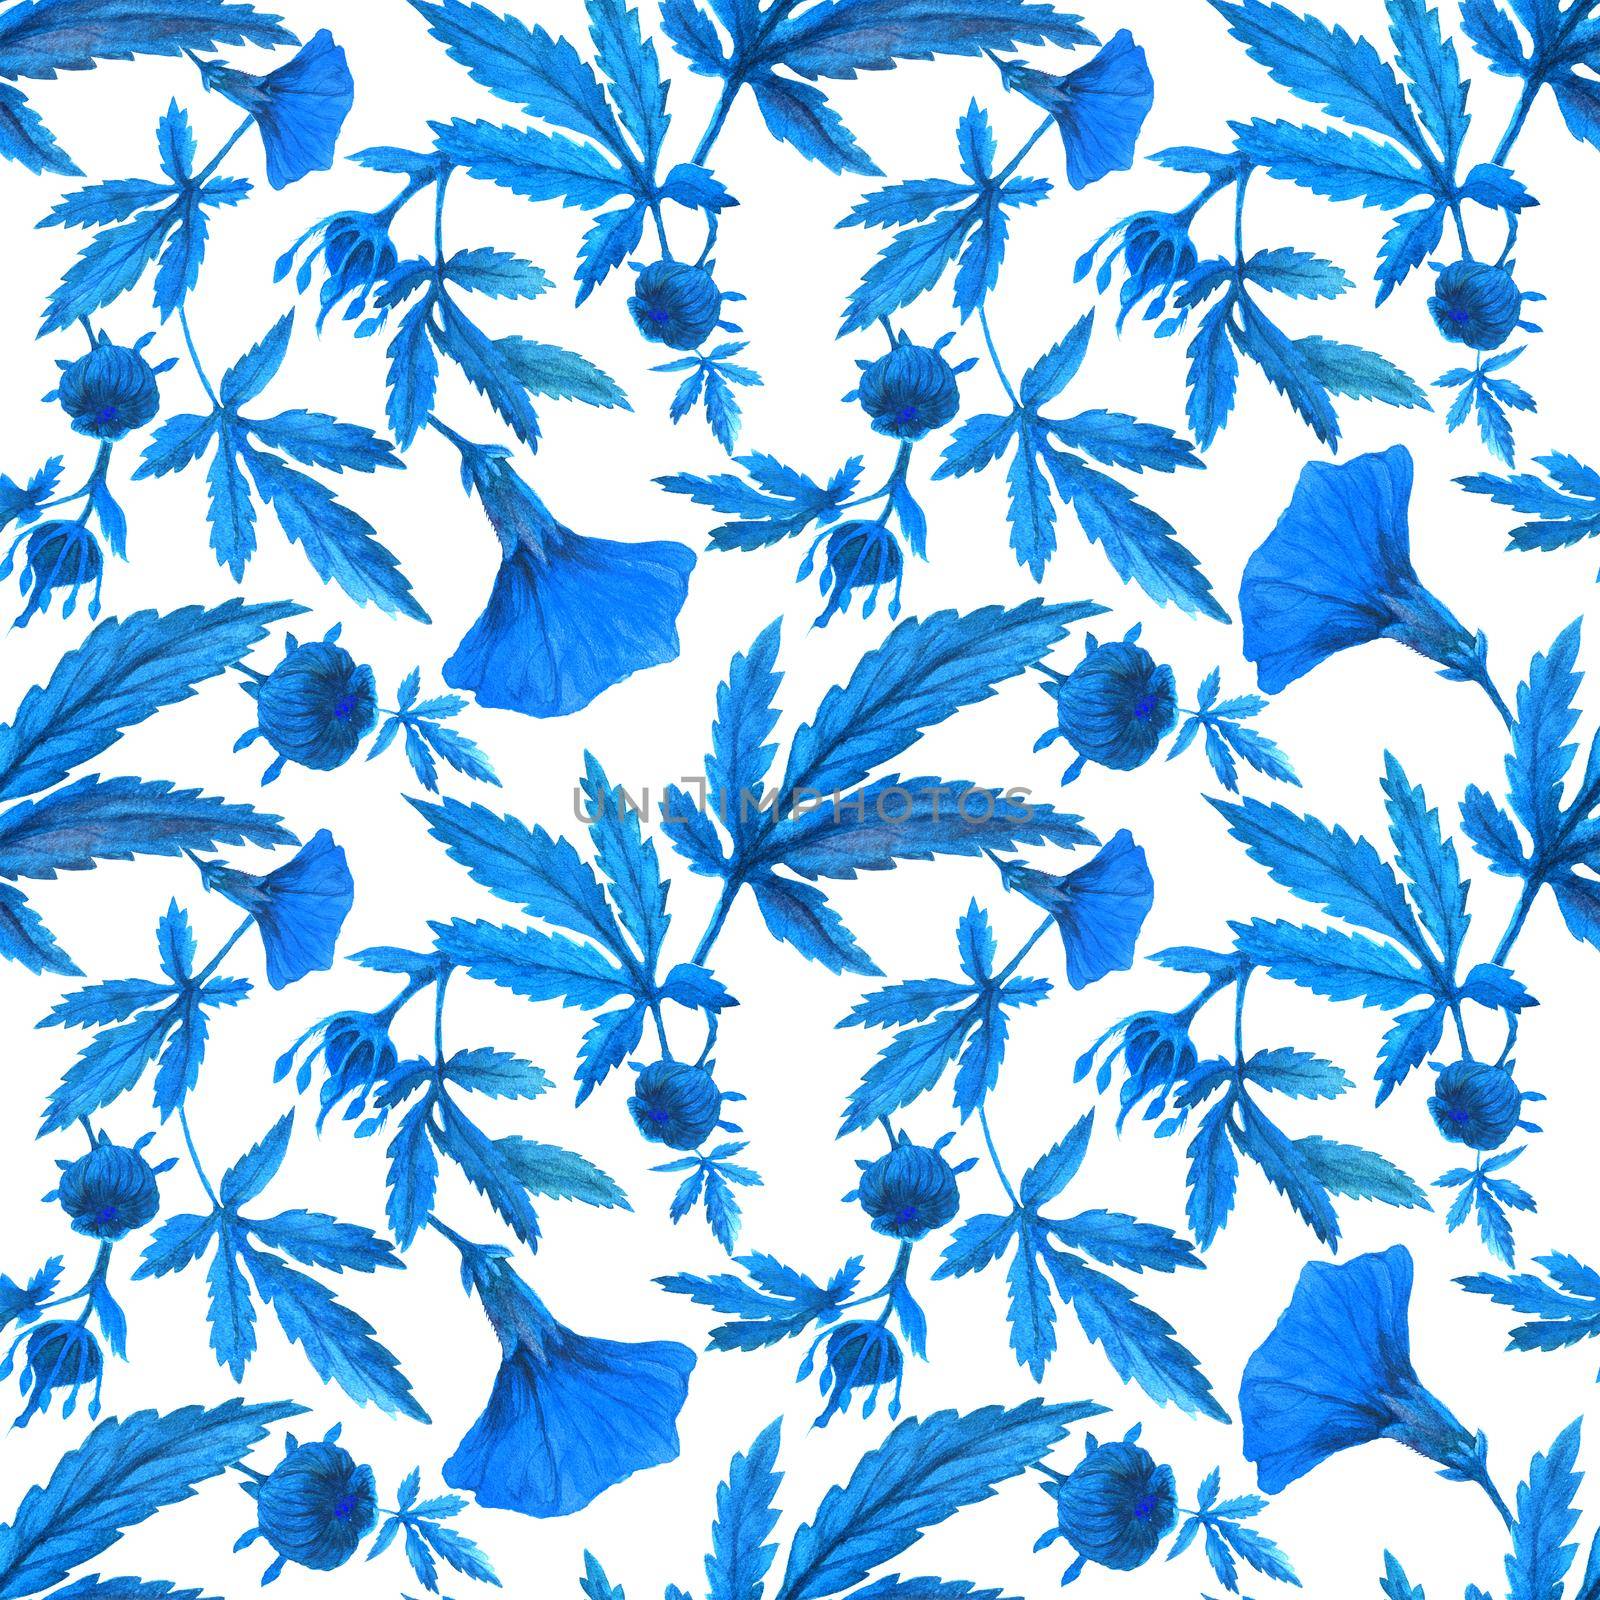 Watercolor cranberry hibiscus garden blue pattern. Flowers and buds on a branch.